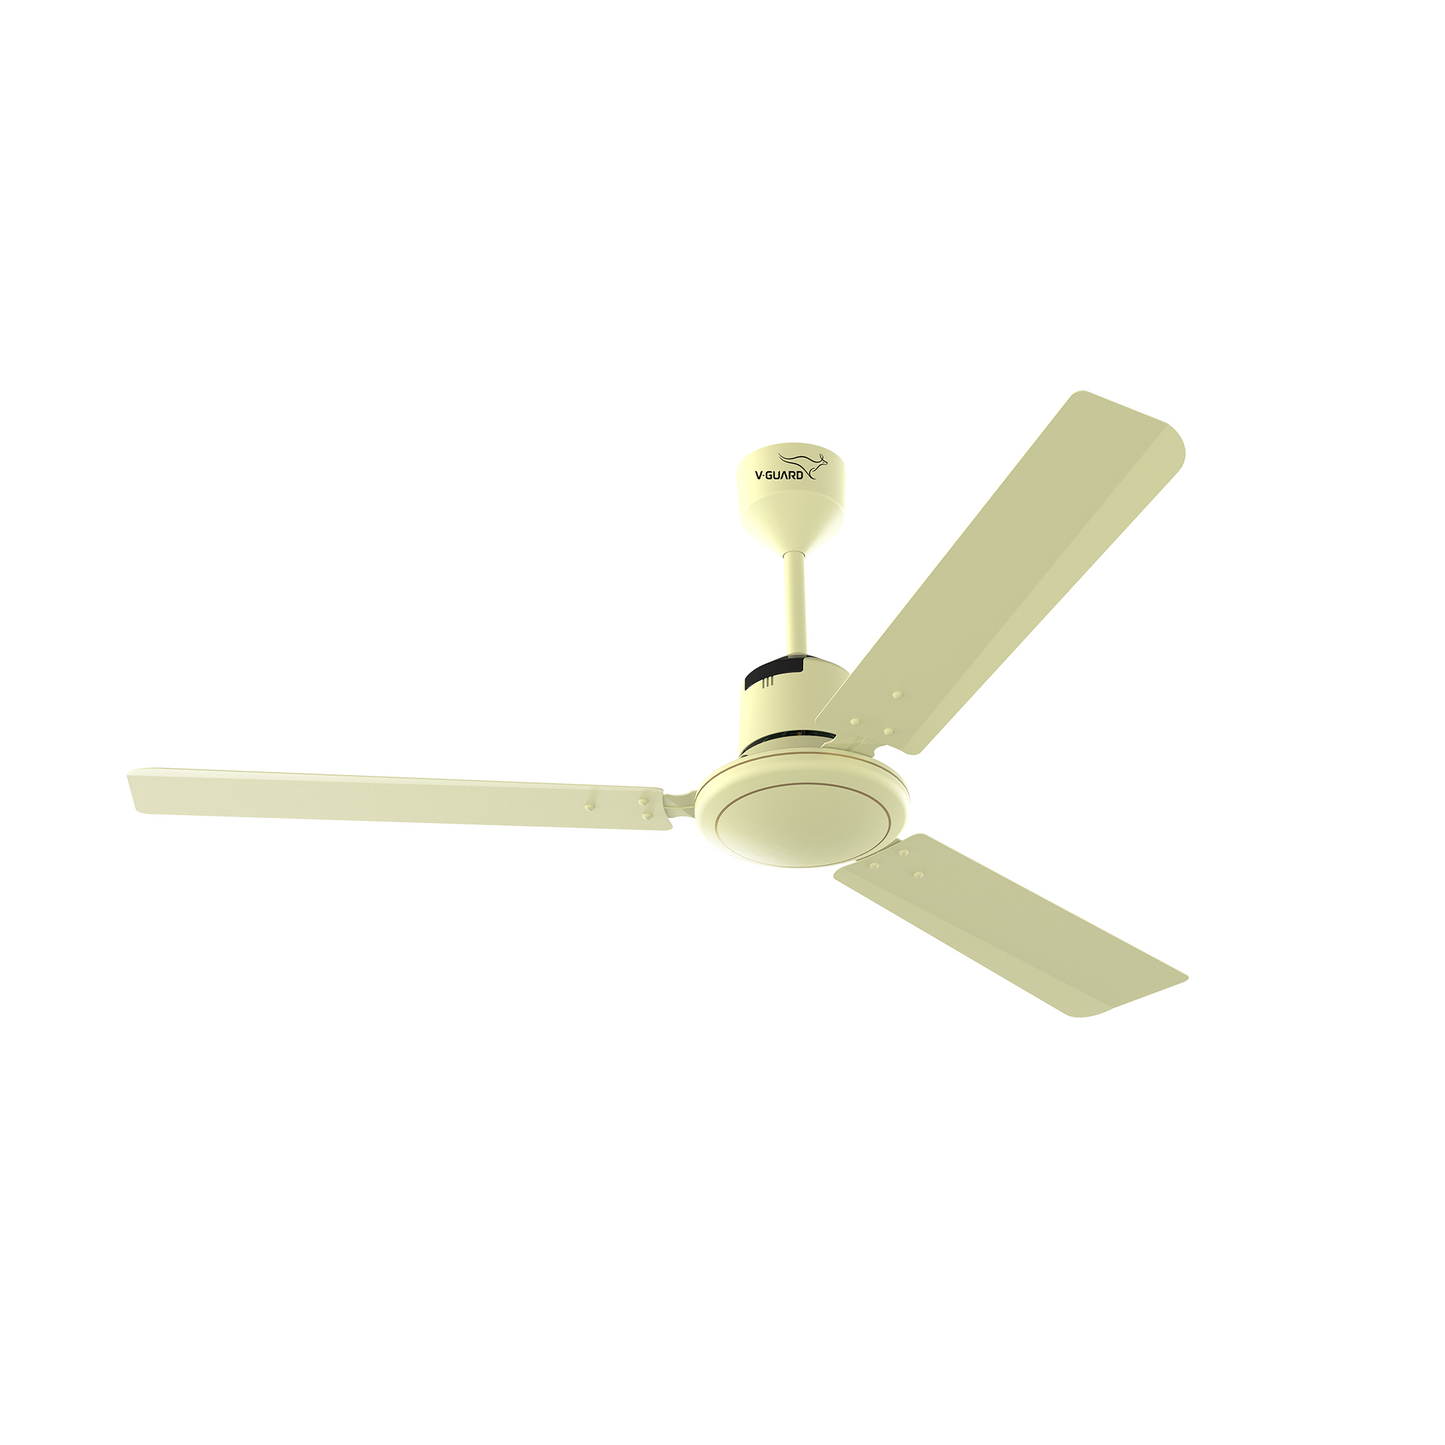 Ecowind Neo Plus BLDC Motor Ceiling Fan with Remote, 1.2 m, Ivory, 5 Star Rated